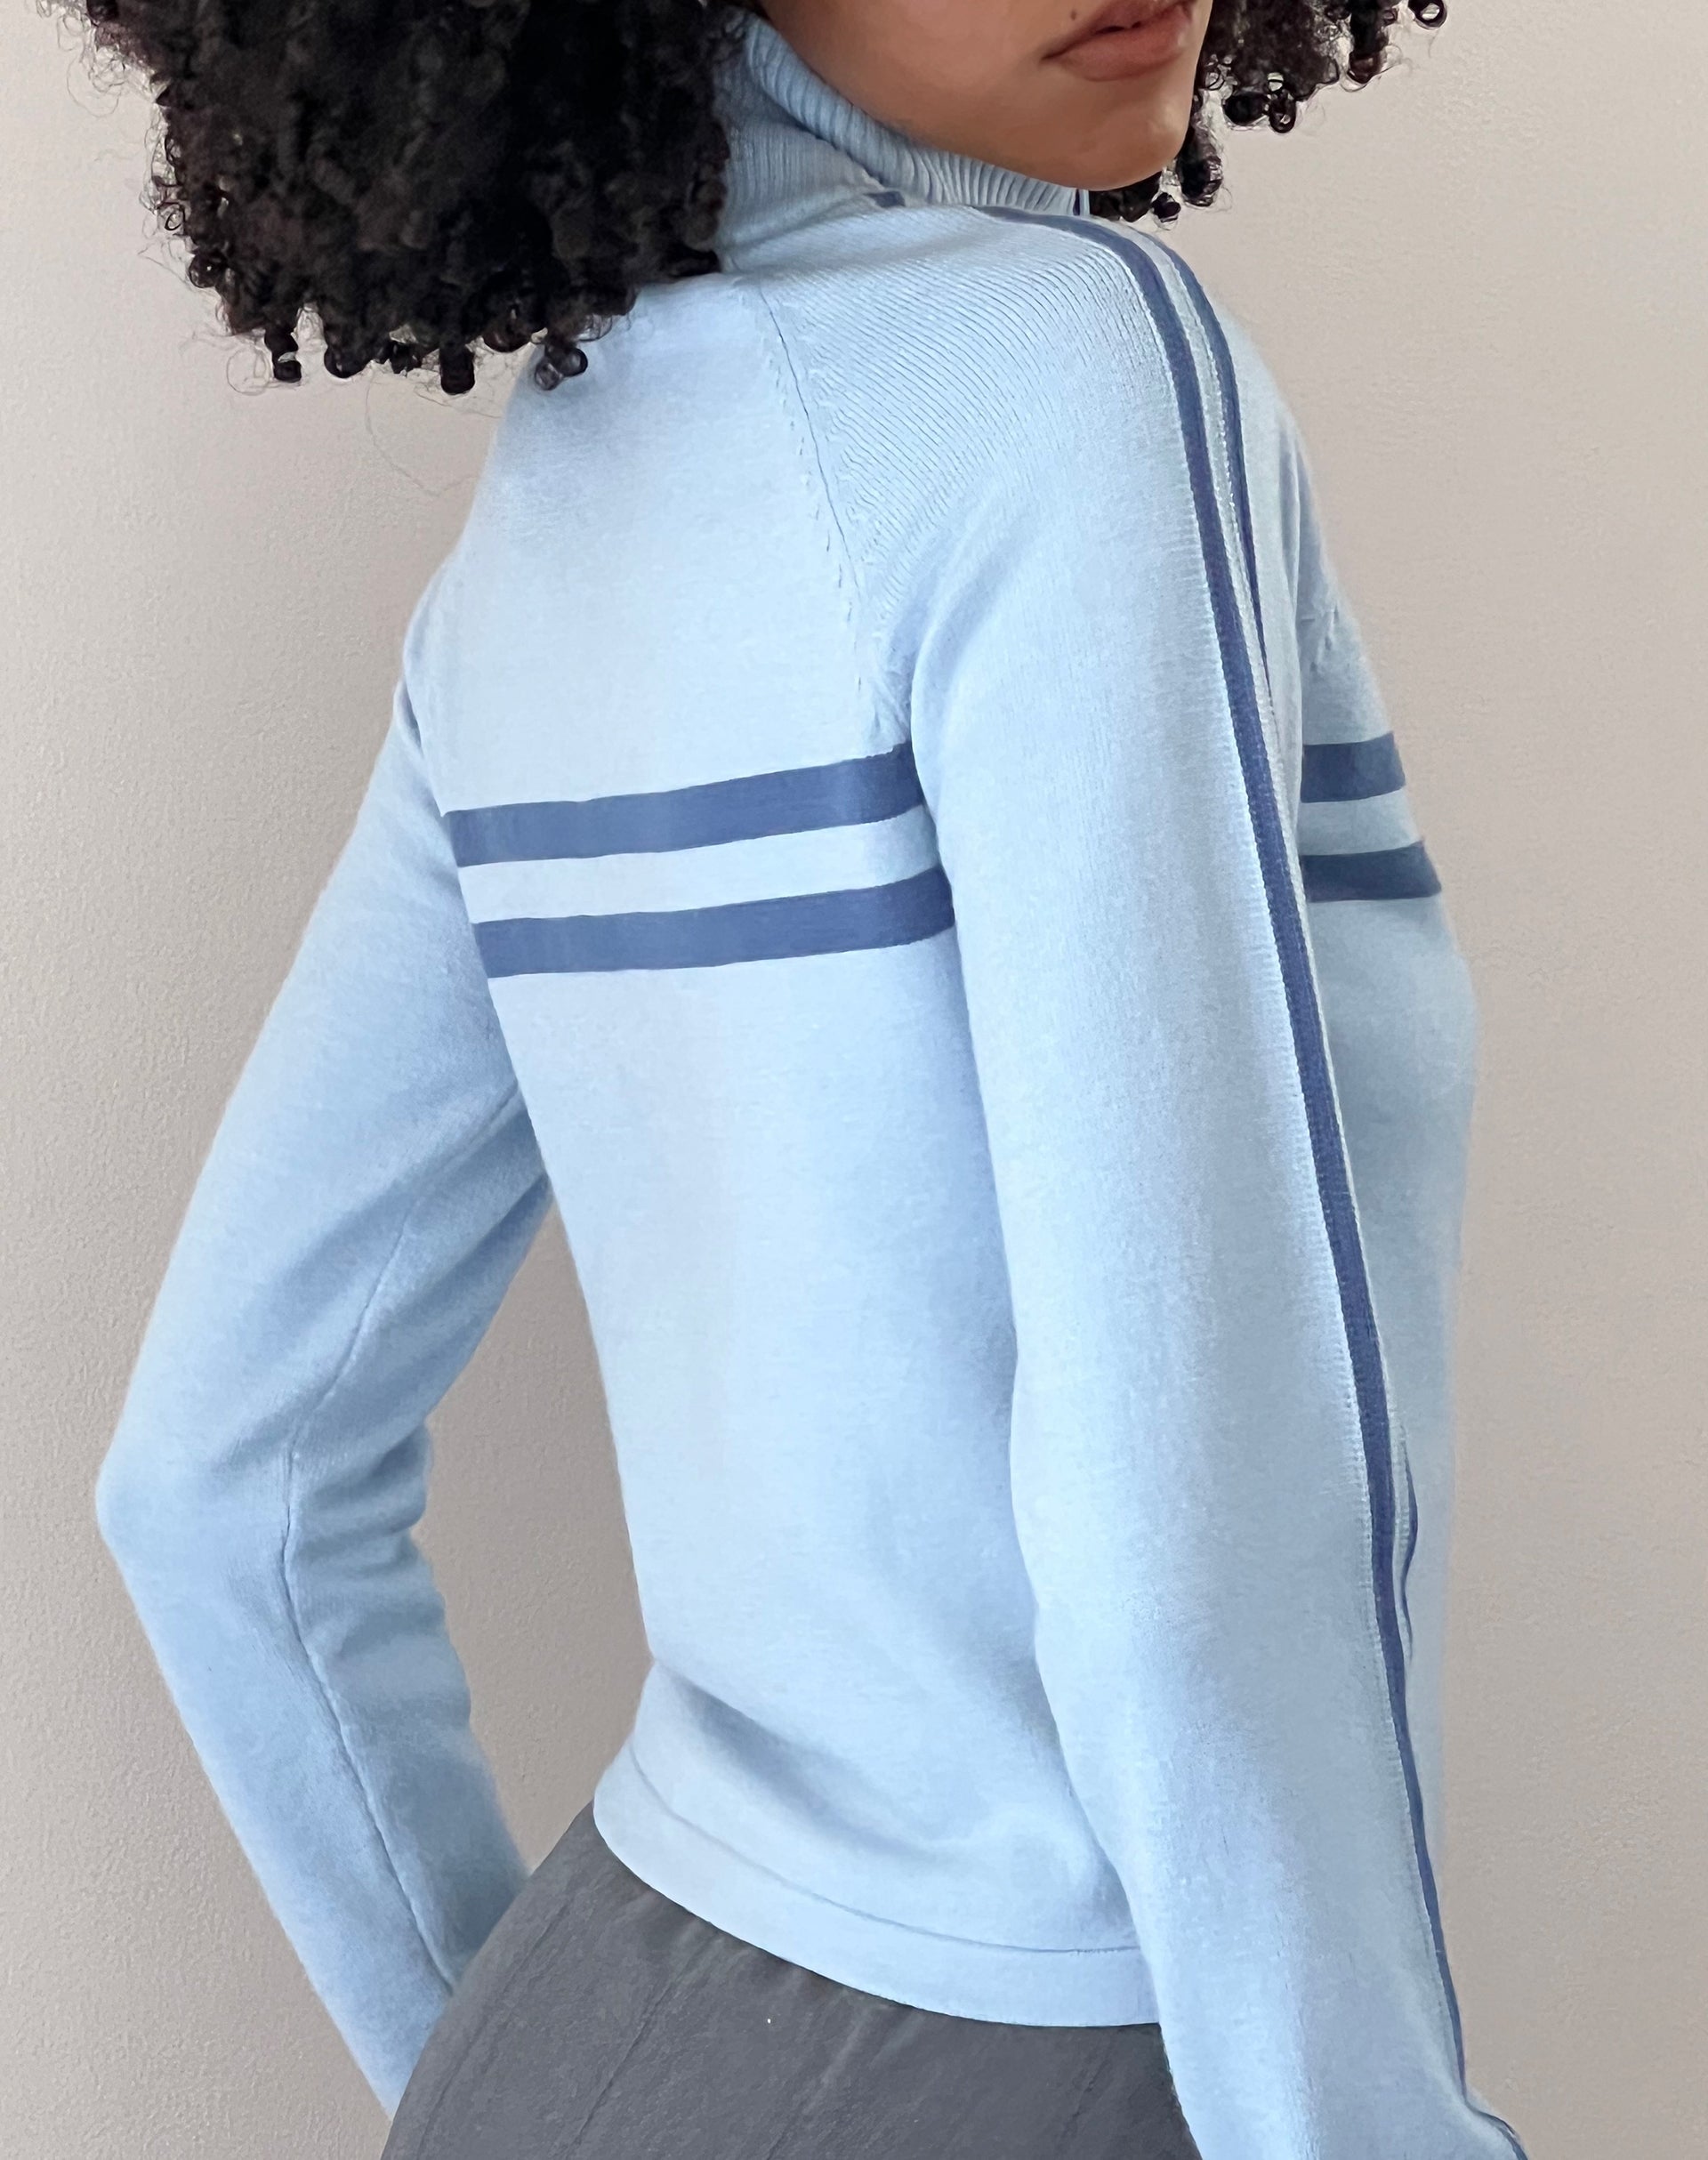 Image of Talisa Sporty Zip Through Jacket in Knit Light Blue